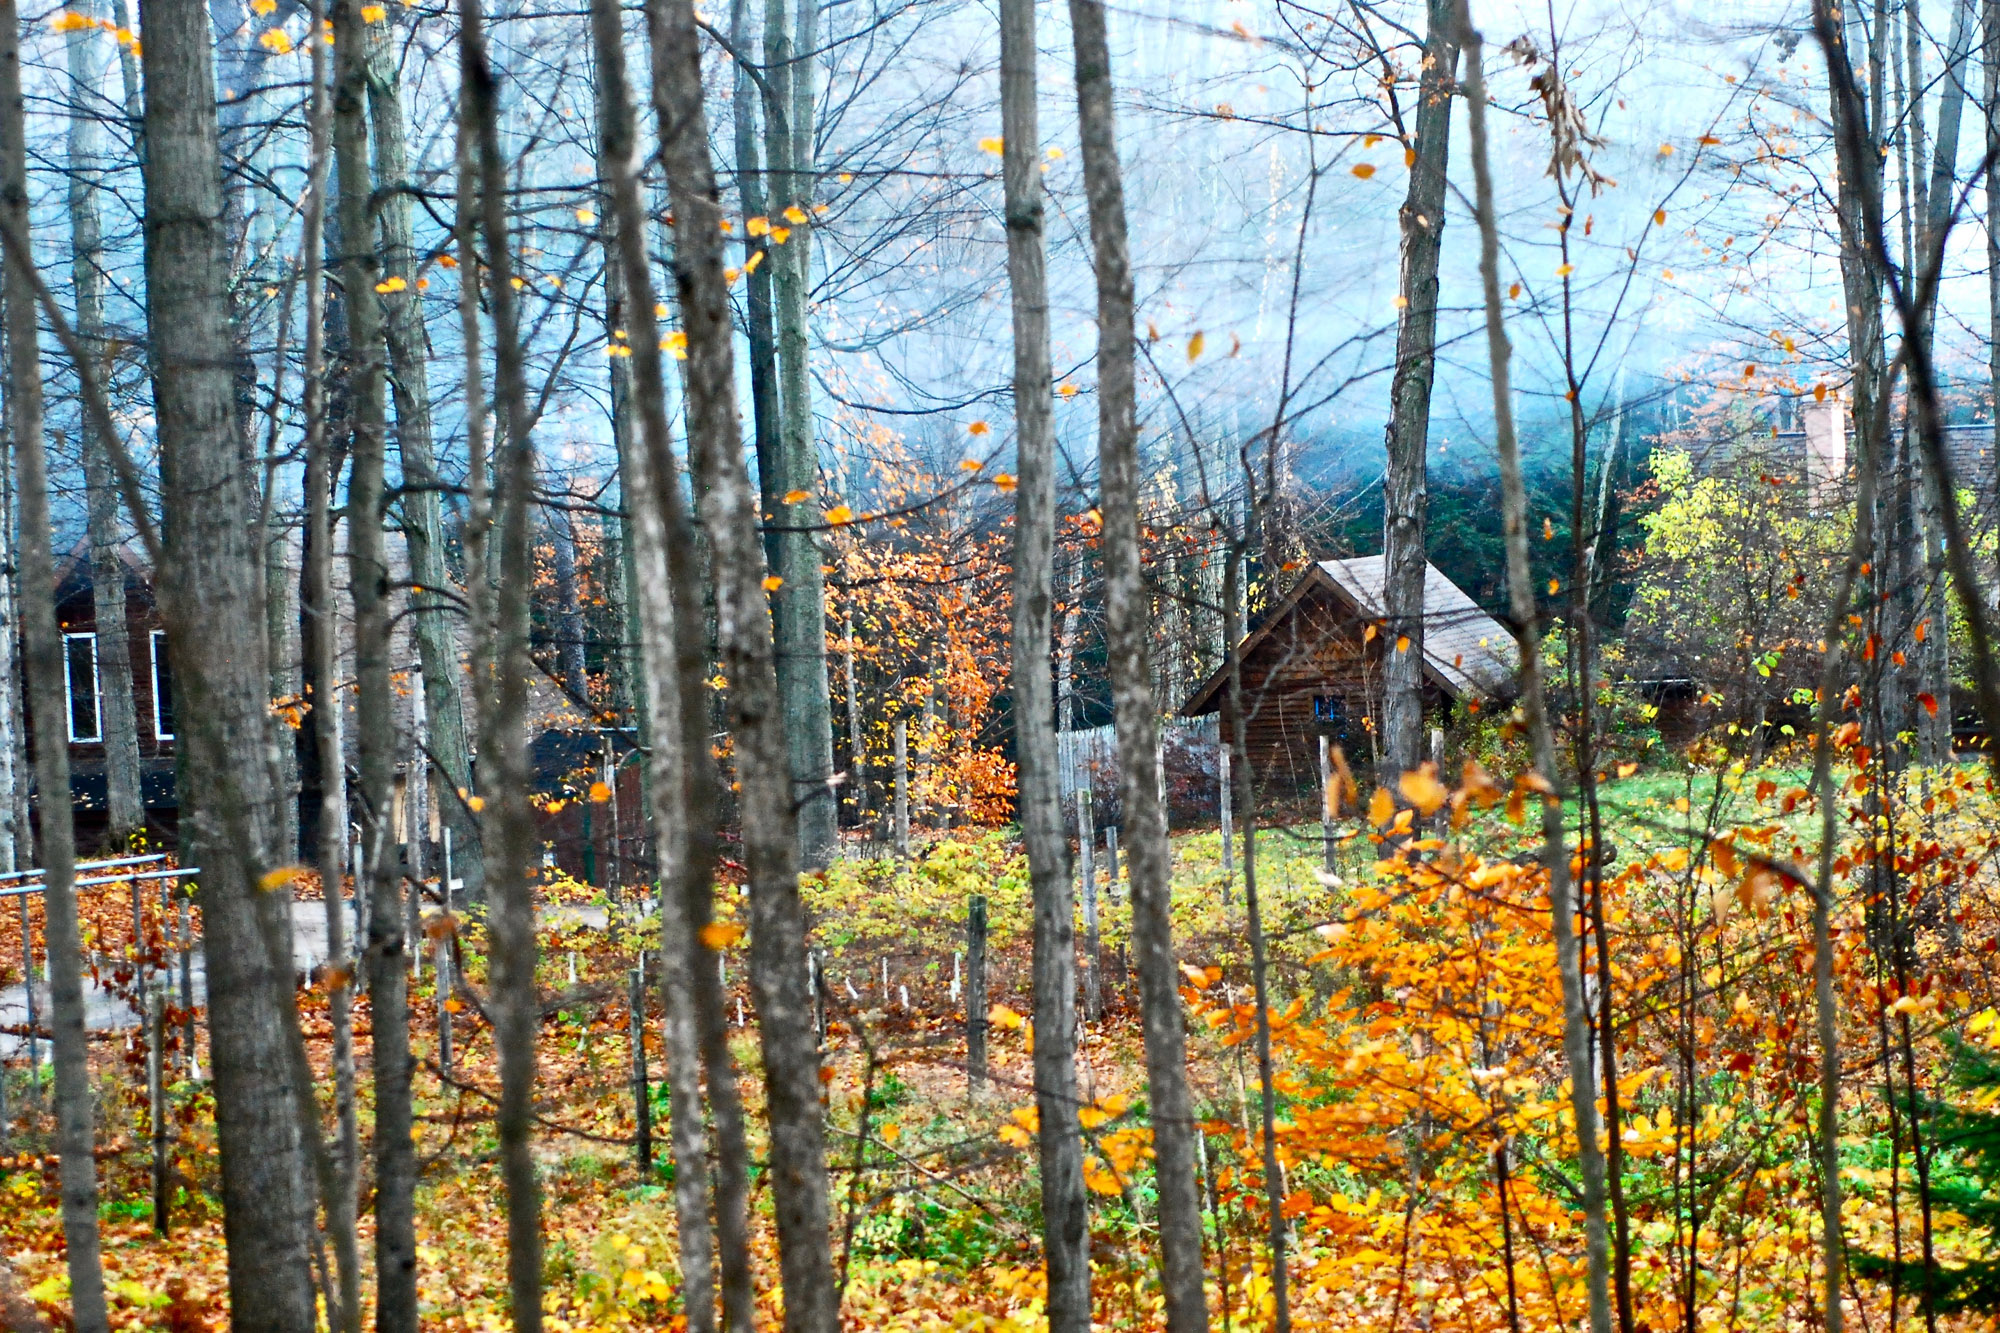 Writer and photographer Debra Lynn Hook spent two and a half weeks in a rustic cabin on 200 acres of Michigan forestland. Photo: Debra Lynn Hook